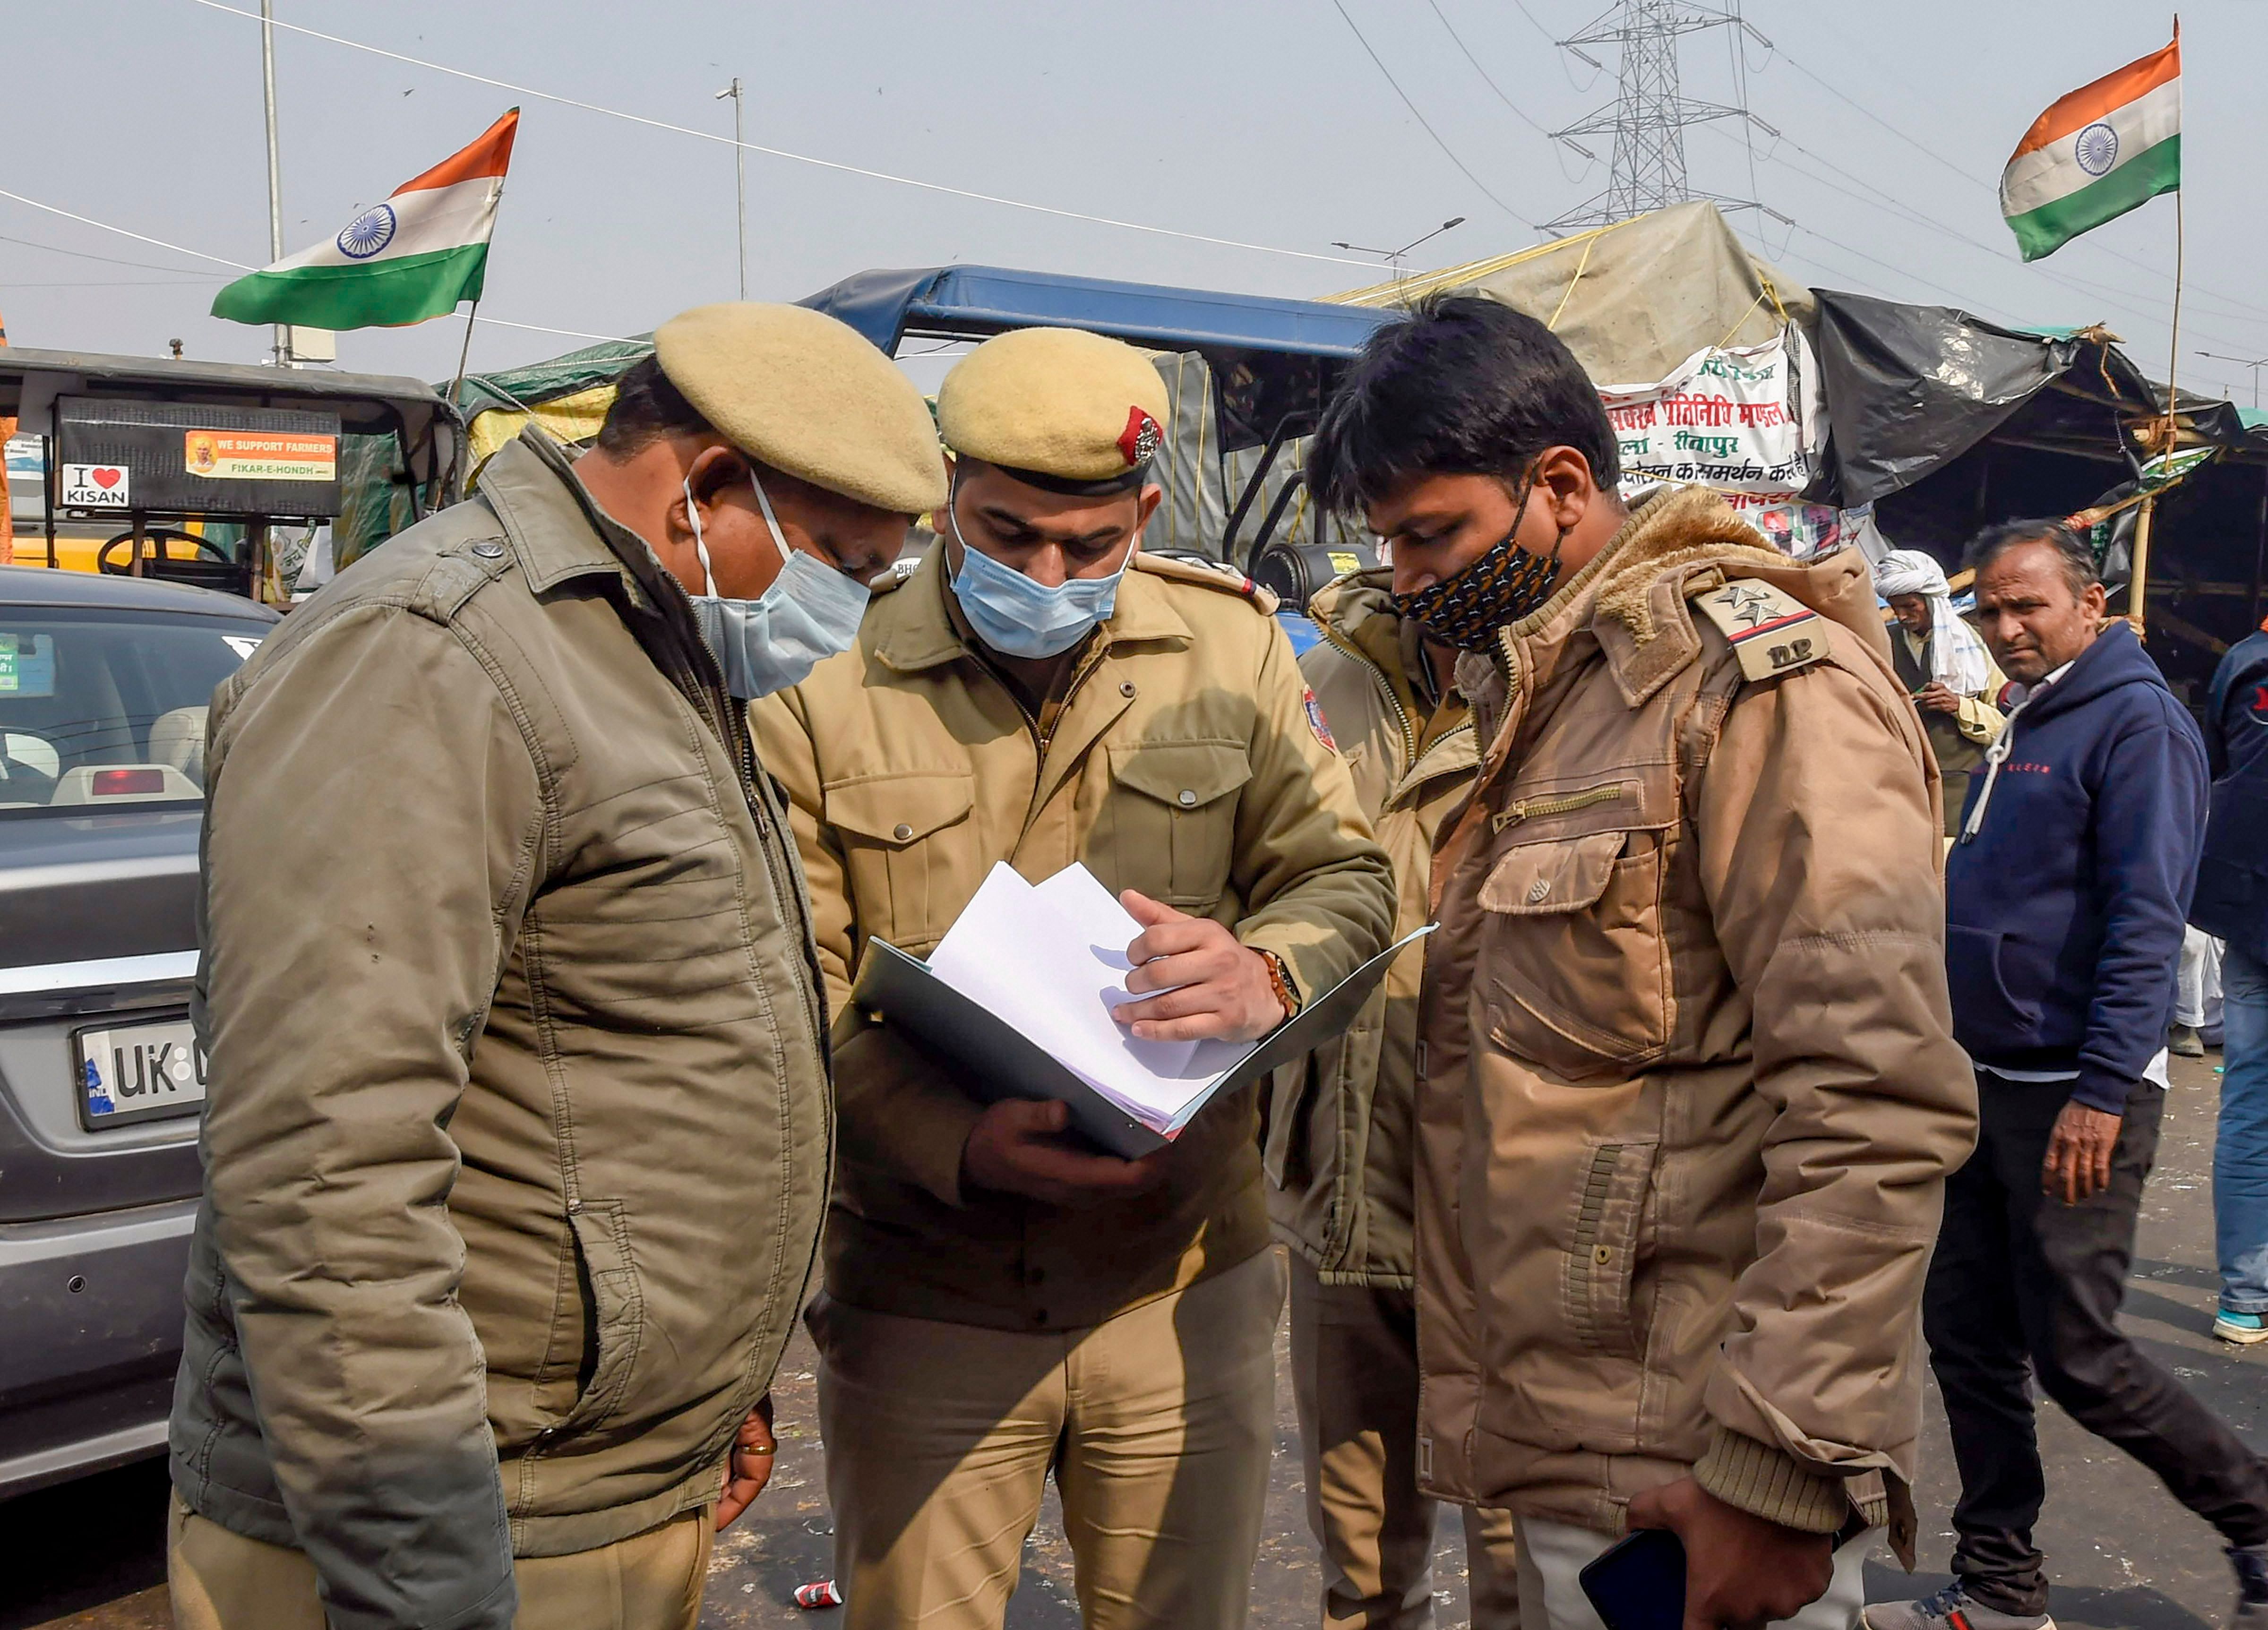 Police personnel arrive at Ghazipur border to hang notices for farmer leaders after the FIRs registered against them in connection with Republic Day violence, during the ongoing protest against the new farm laws, in New Delhi, Thursday, Jan 28, 2021. (PTI Photo/Kamal Singh)